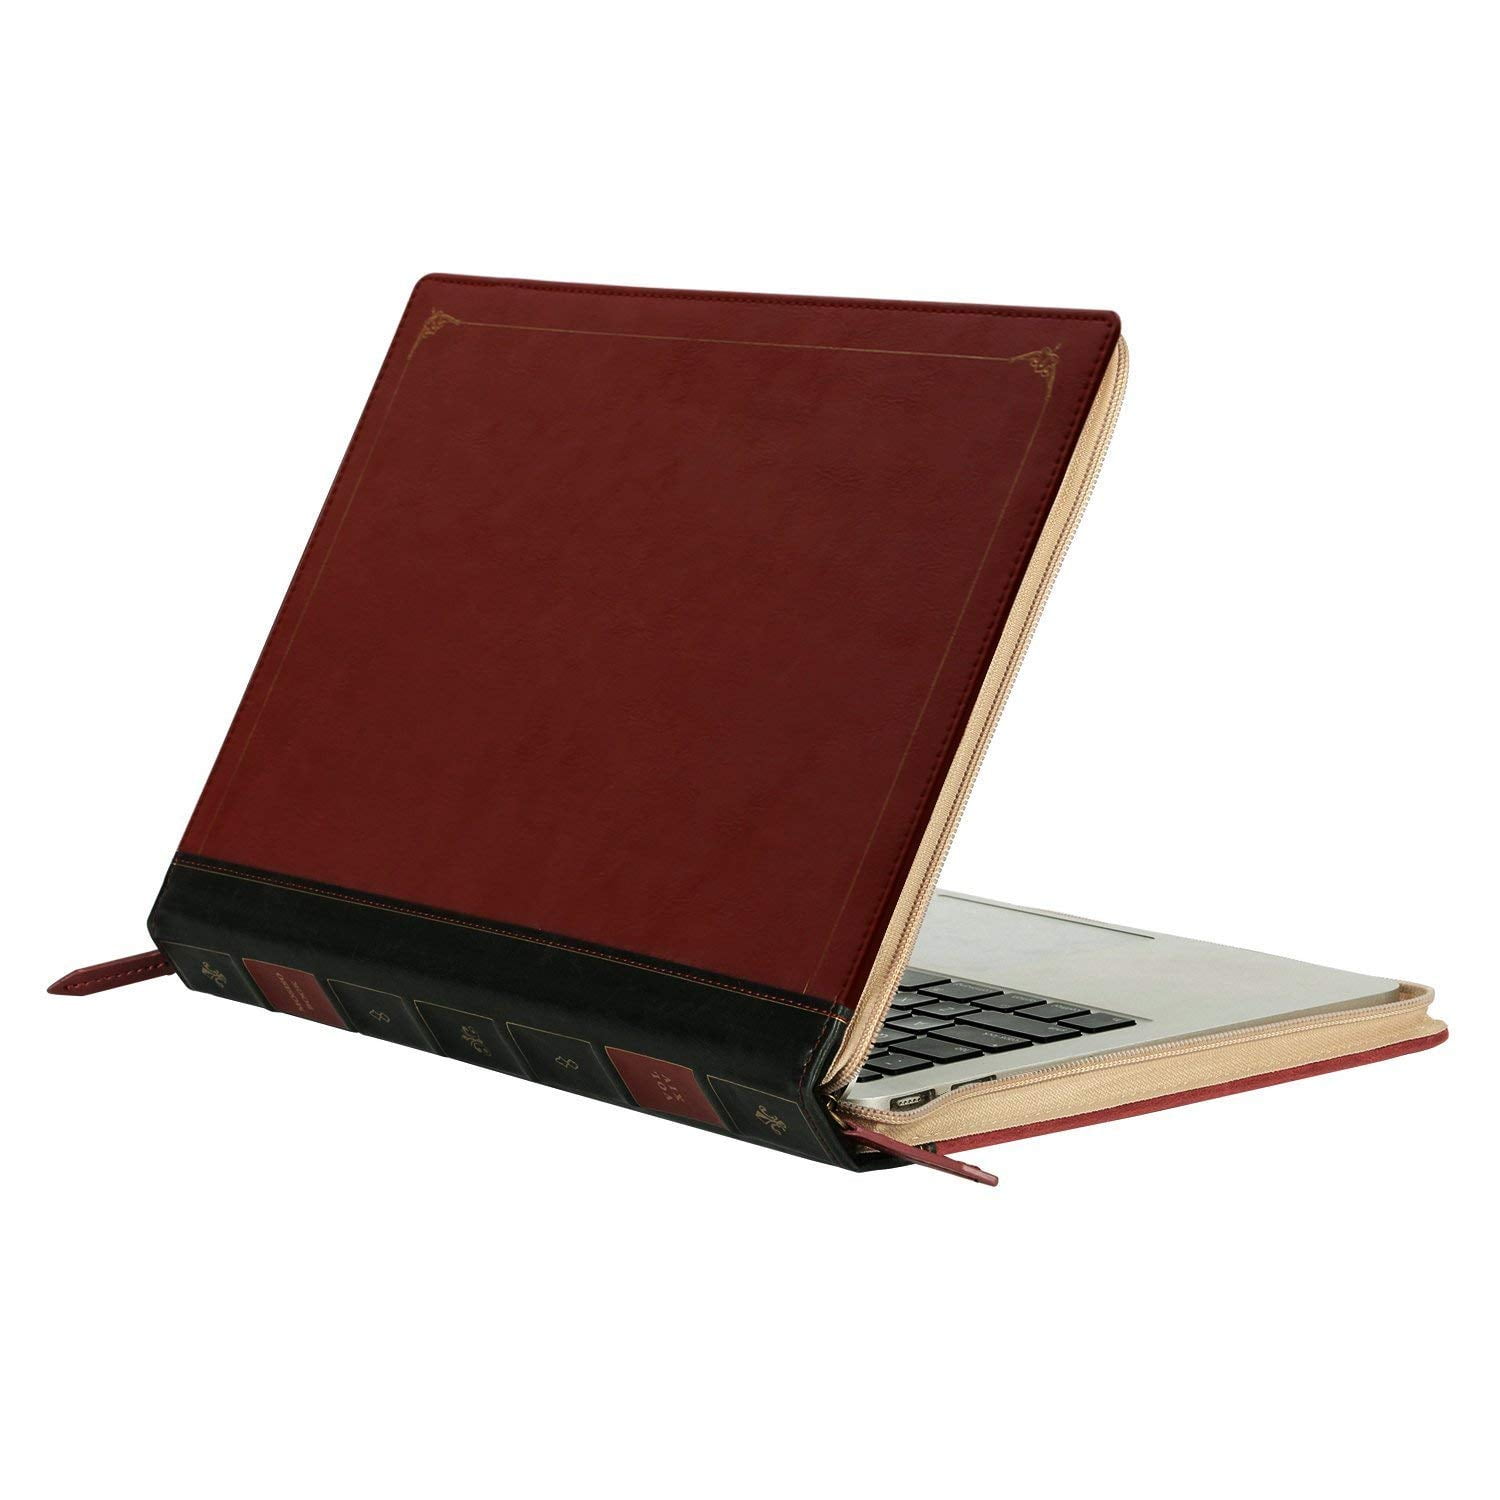 Mosiso Macbook Pro 15 Inch Case Pu Leather Laptop Sleeve Vintage Retro Zippered Book Folio Cover Compatible With 19 18 17 16 Macbook Pro 15 Inch With Touch Bar A1990 A1707 Wine Red Walmart Com Walmart Com